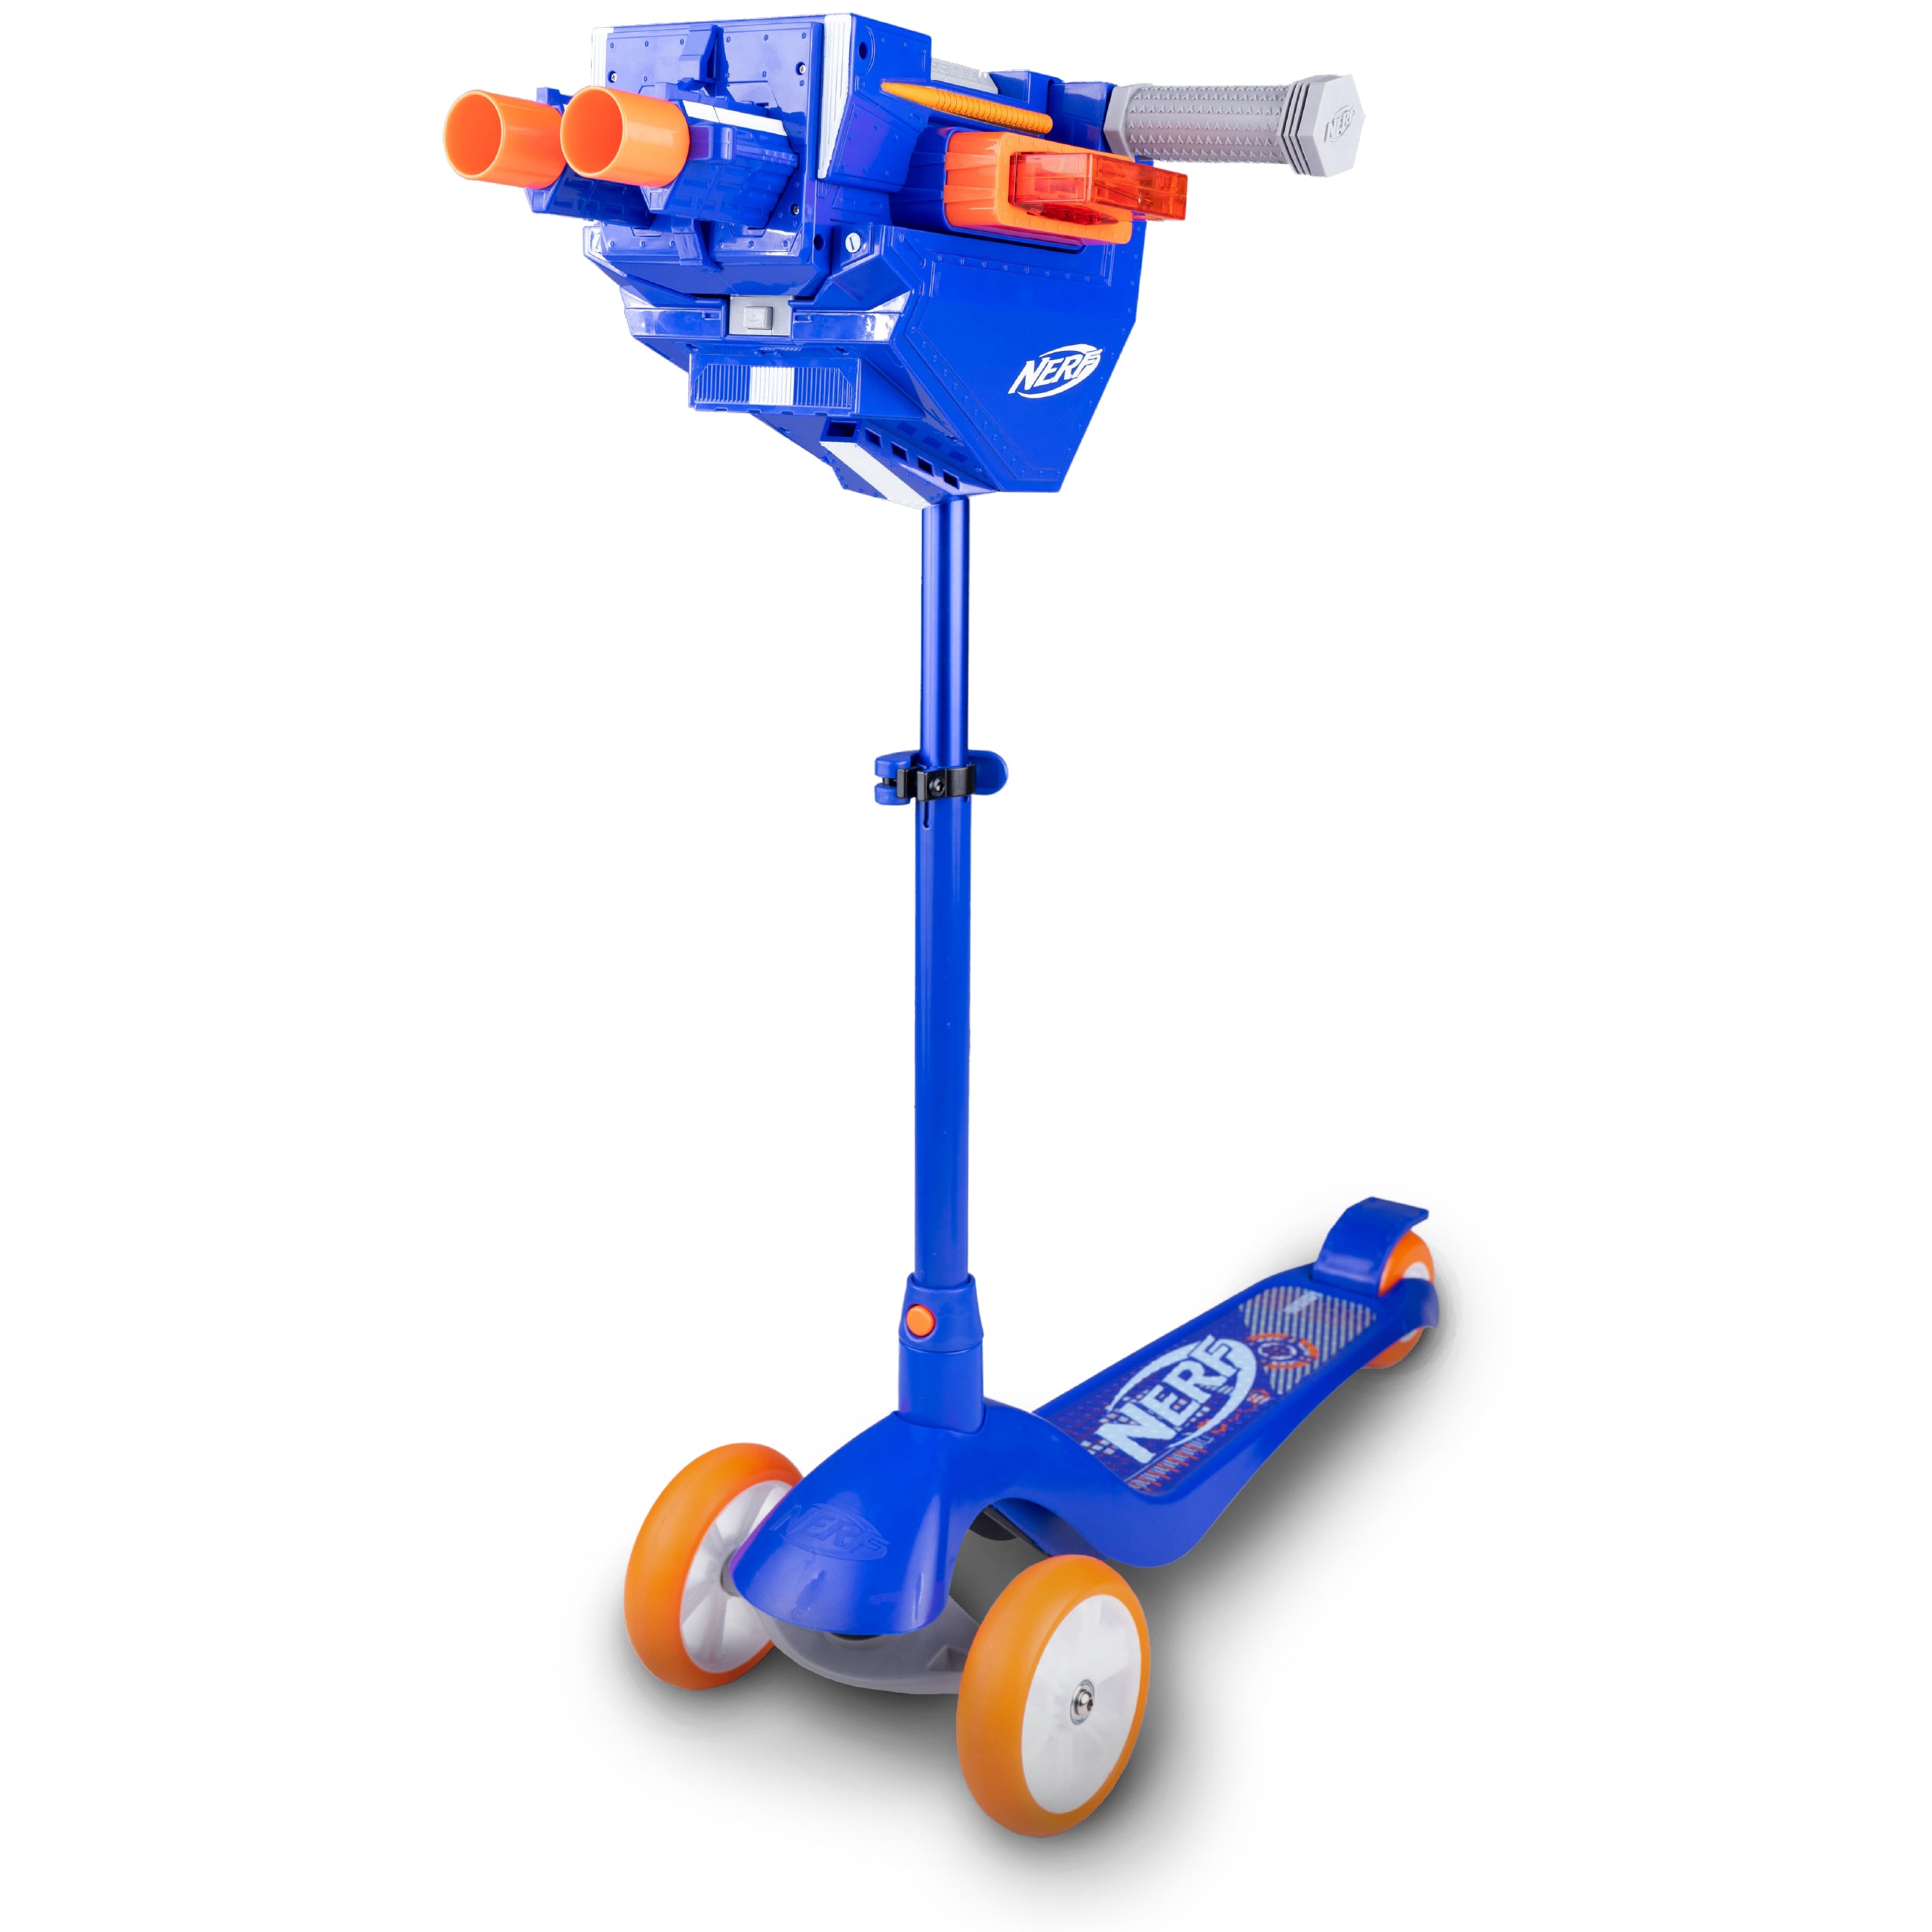 Nerf Scooter – Flybar